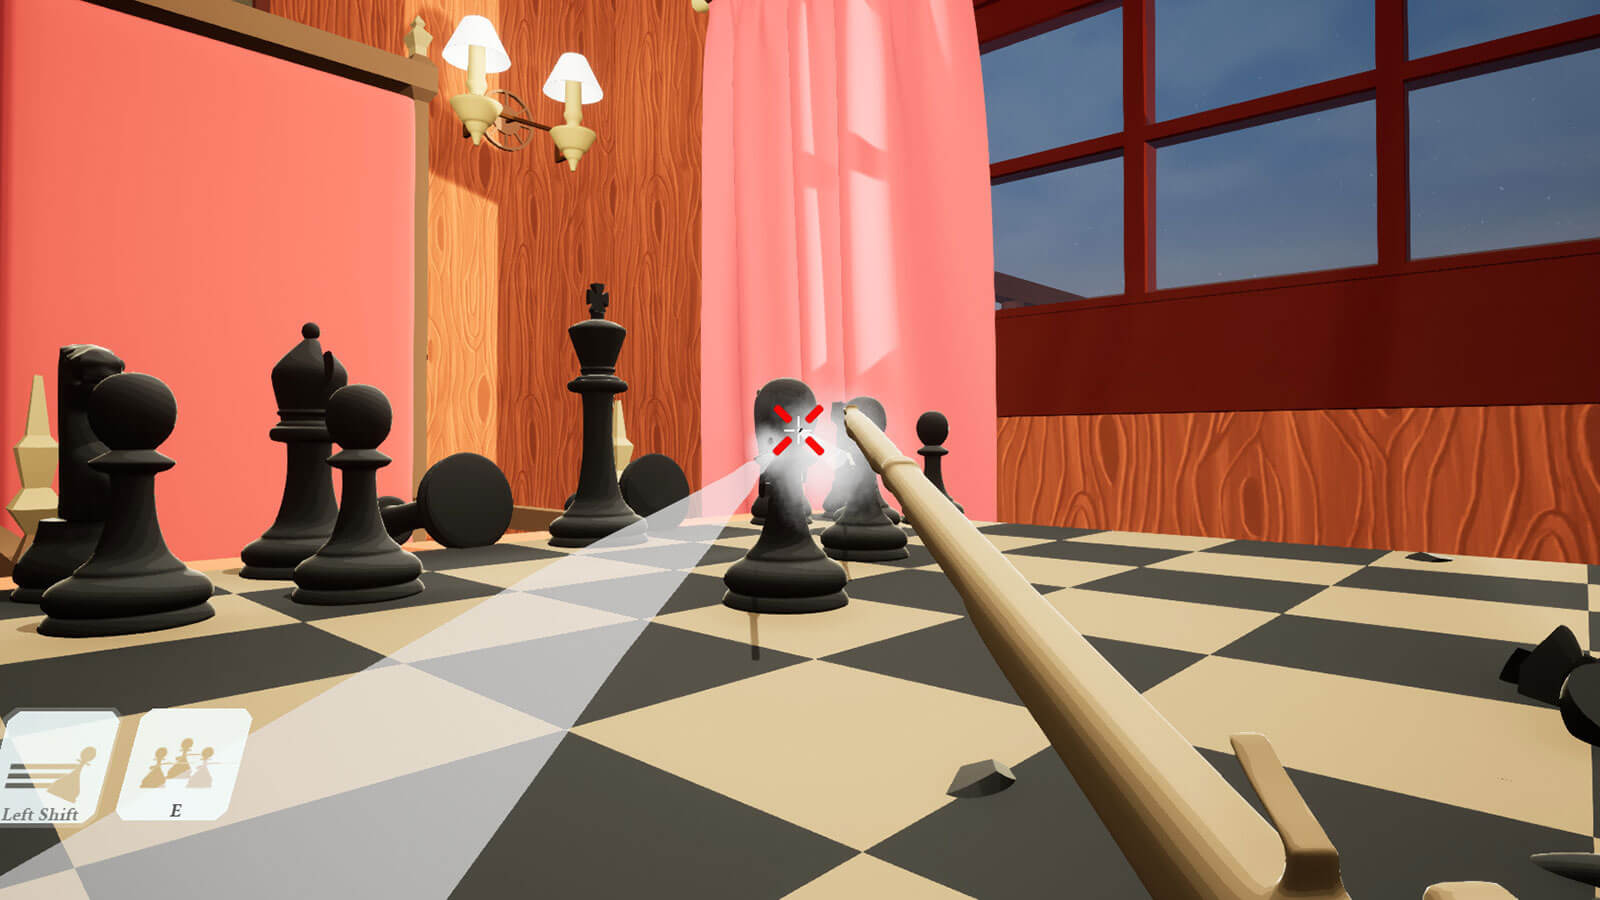 First-person view of a white chess piece firing at a black pawn